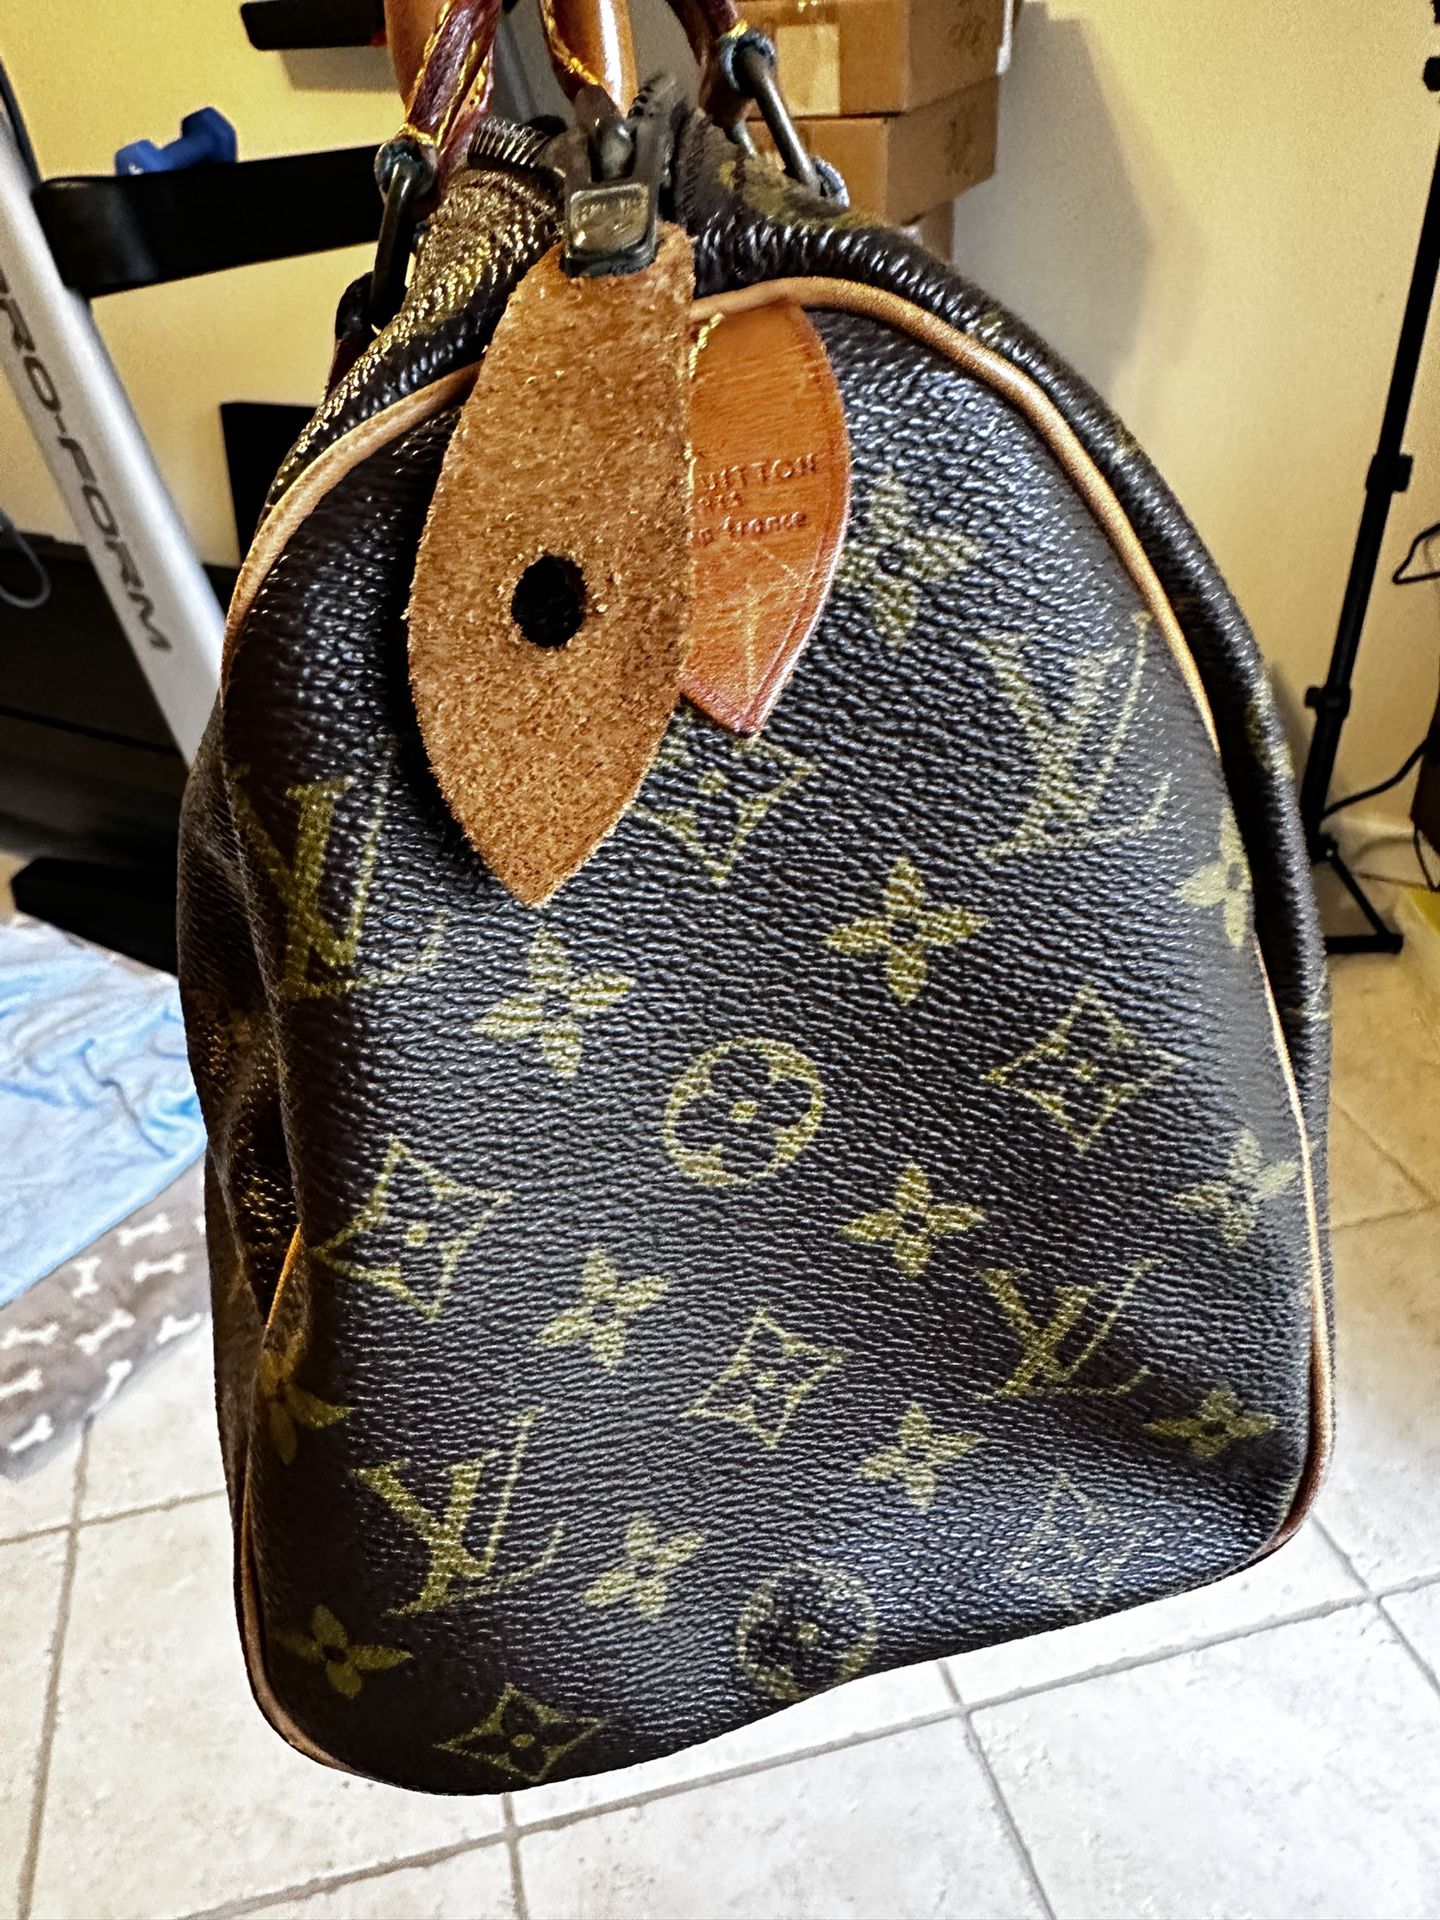 Louis Vuitton Vintage Speedy 40 With Matching Wallet for Sale in Pembroke  Pines, FL - OfferUp